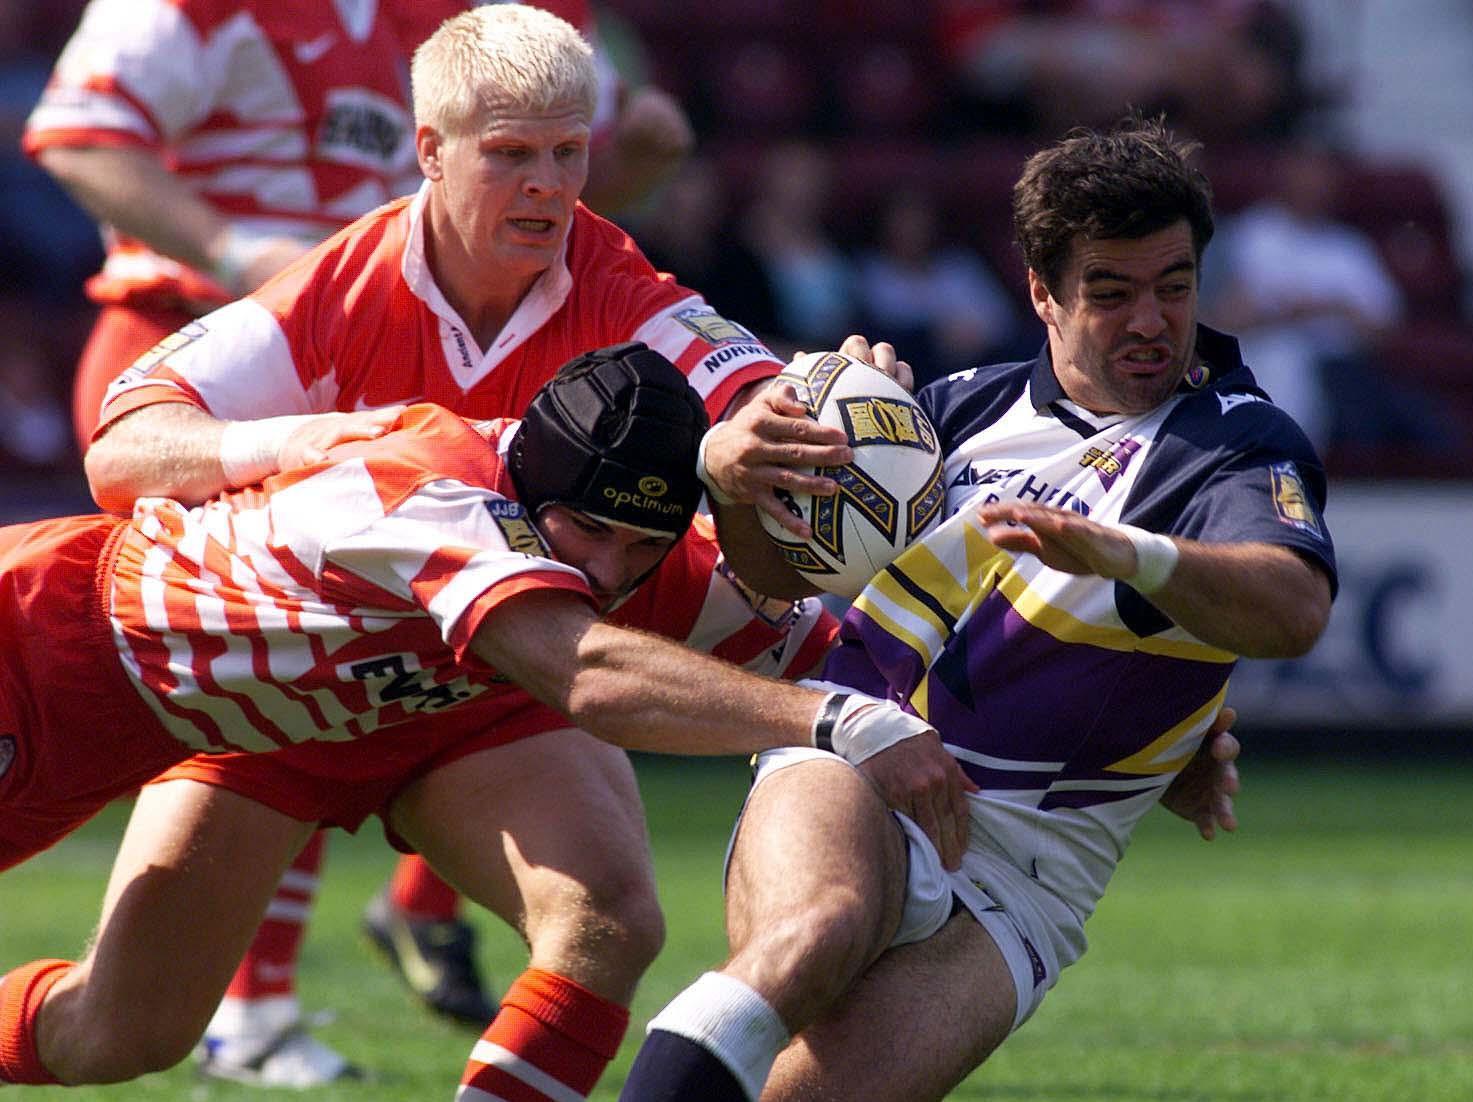 Thunder joined Super League in 1999 and Wigans  away game proved historic, with the match moved to Hearts ground in Scotland and Thunder claiming a 
20-16 win.  Here is future Warrior Brian Carney in action. Picture: SWPix